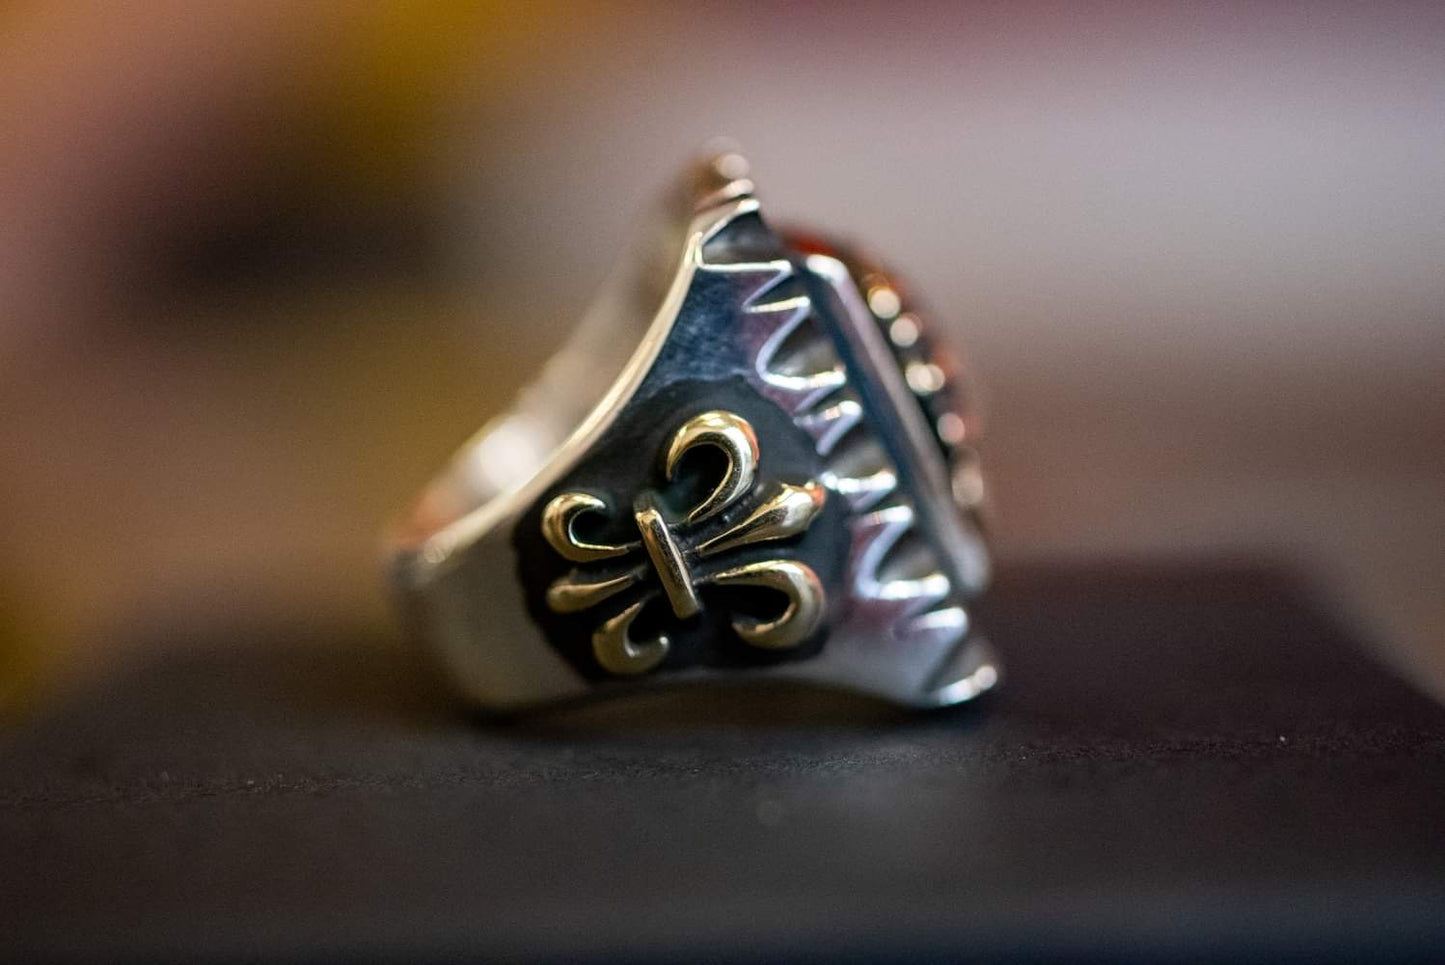 Handmade from sterling silver and brass in South Korea, this ring features a raised Native American Chief head motif